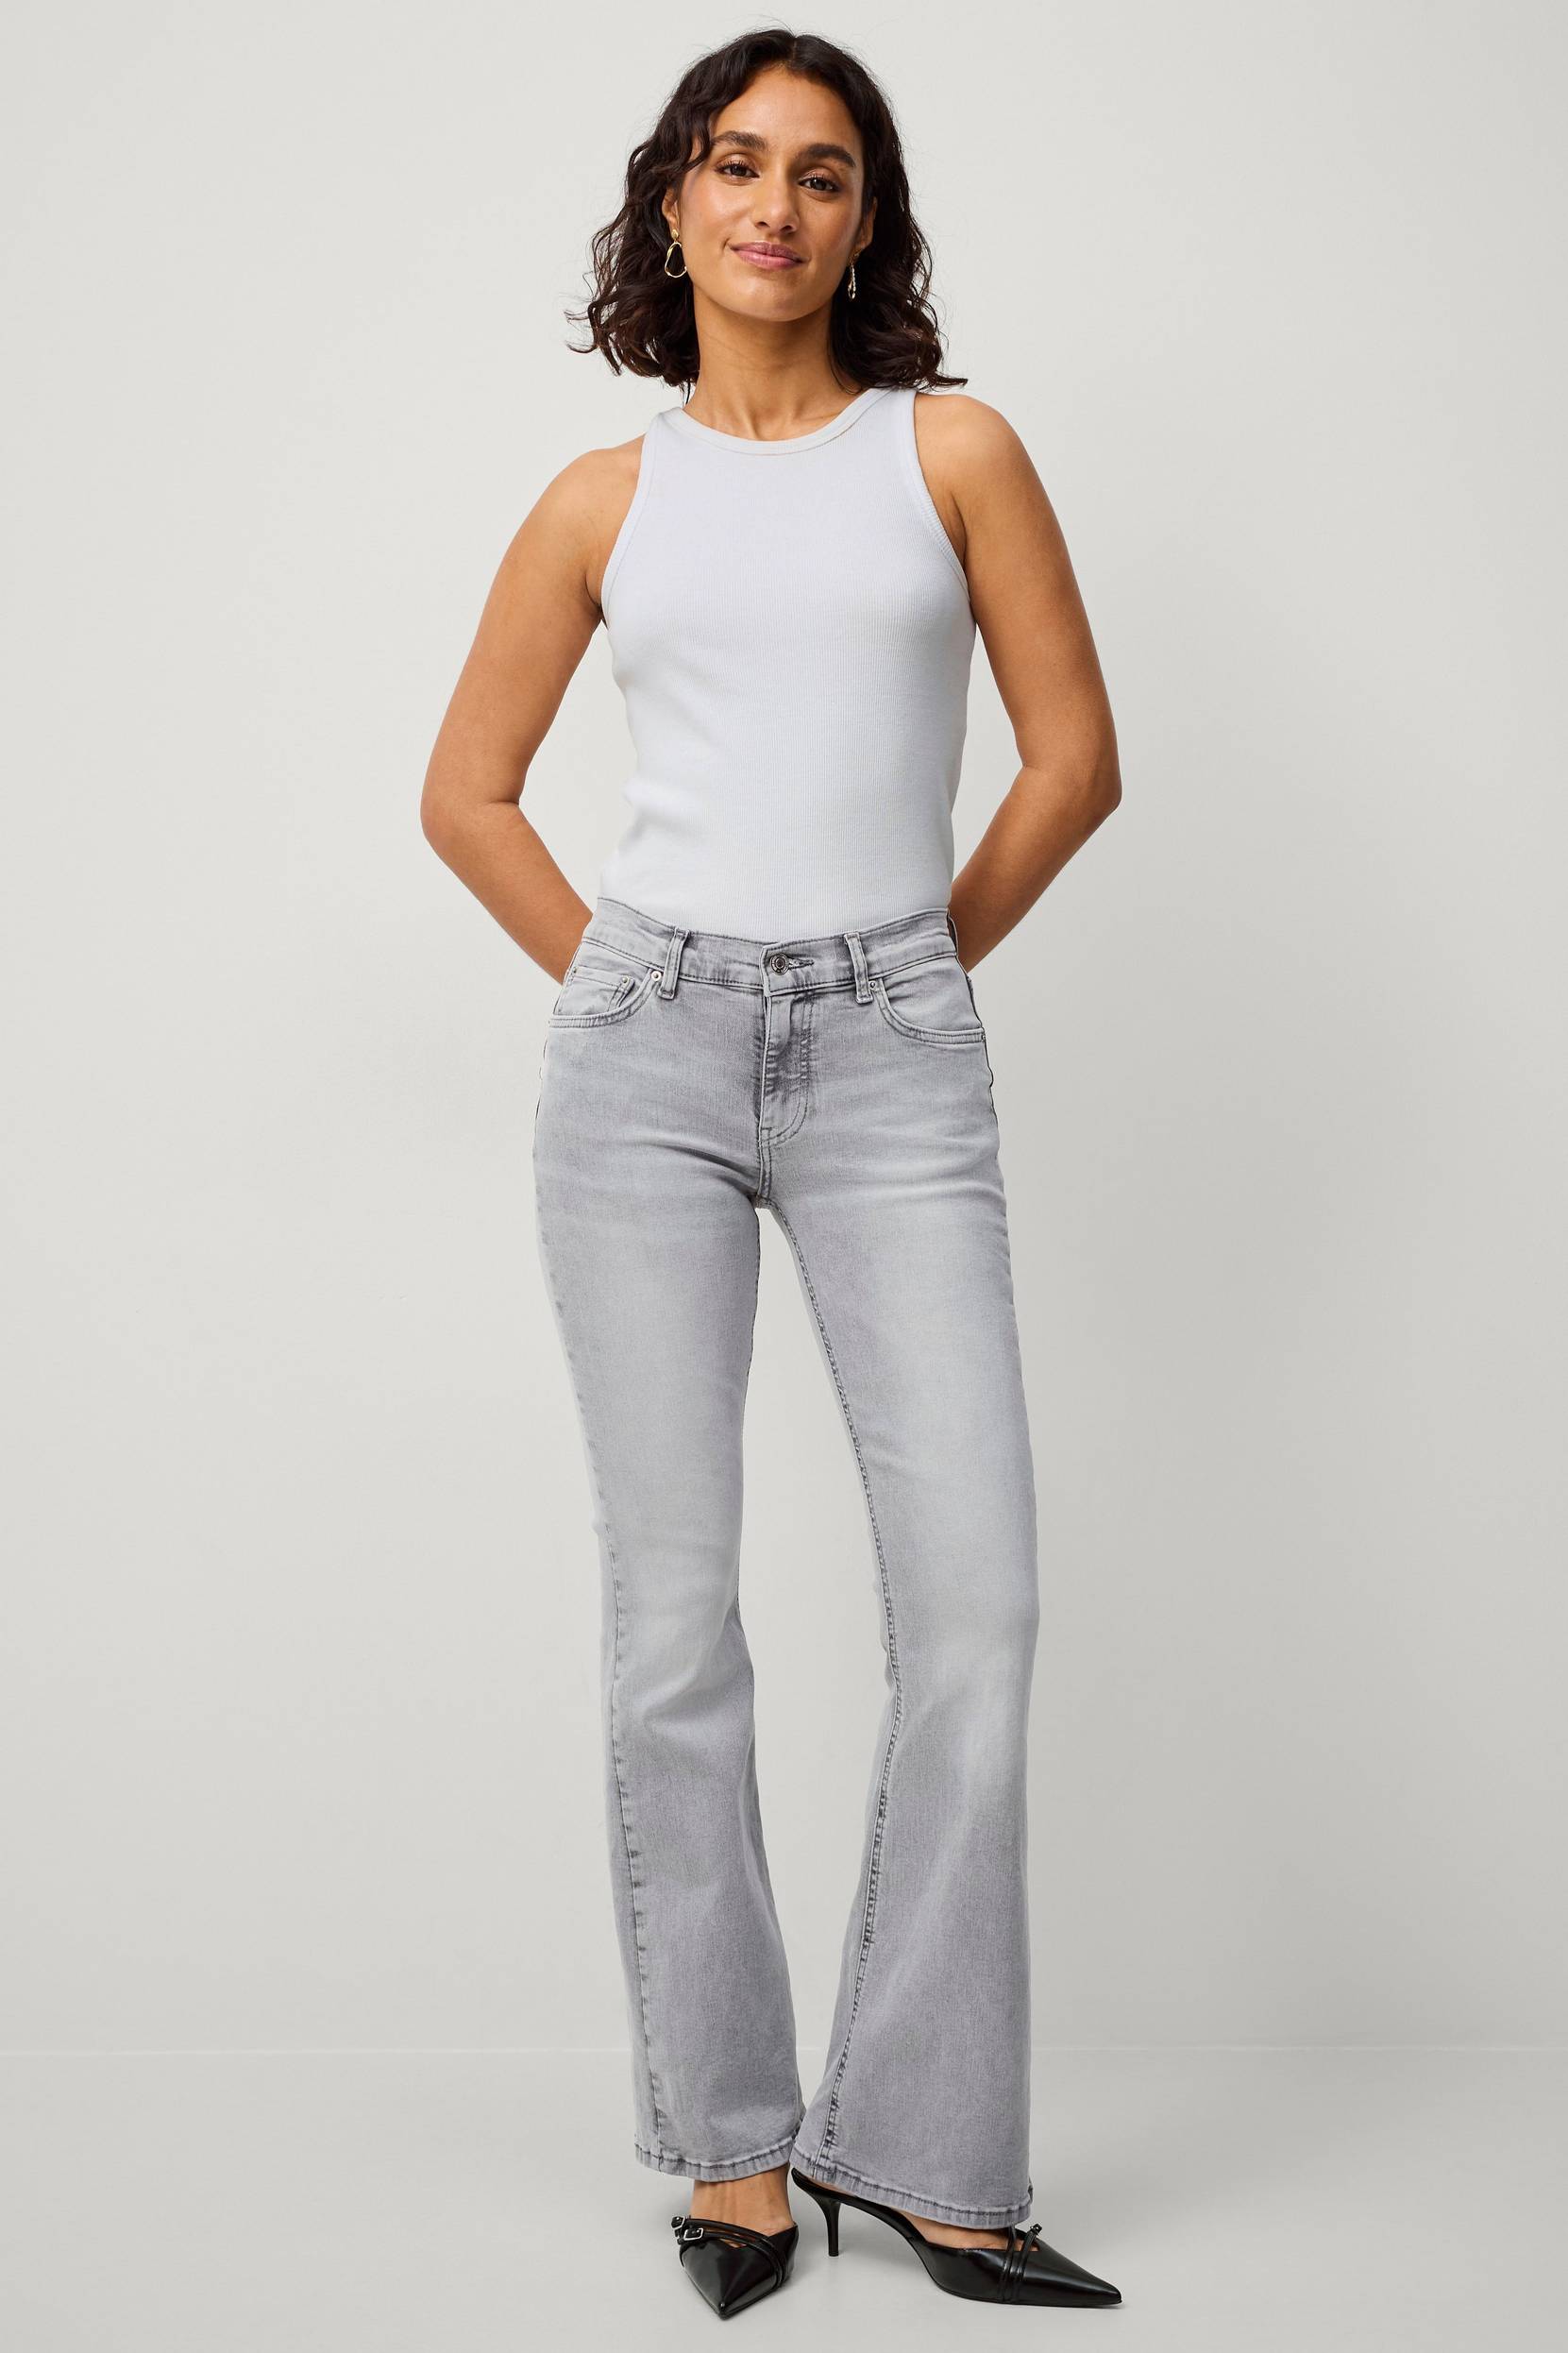 Gina Tricot - Jeans Low Waist Bootcut Jeans - Grå - 40